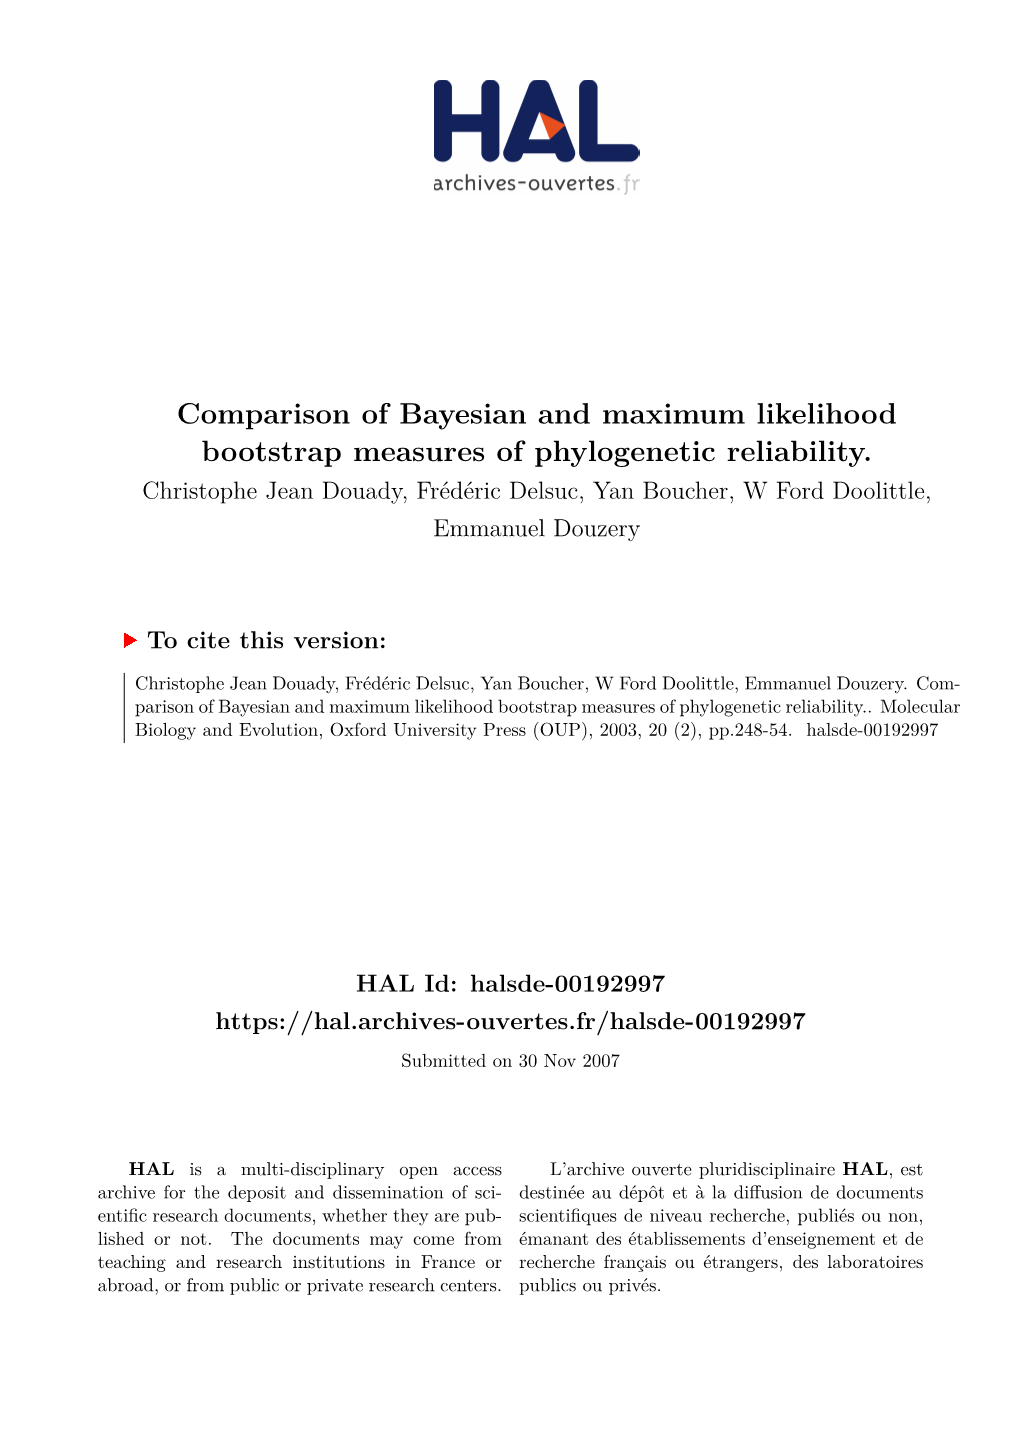 Comparison of Bayesian and Maximum Likelihood Bootstrap Measures of Phylogenetic Reliability